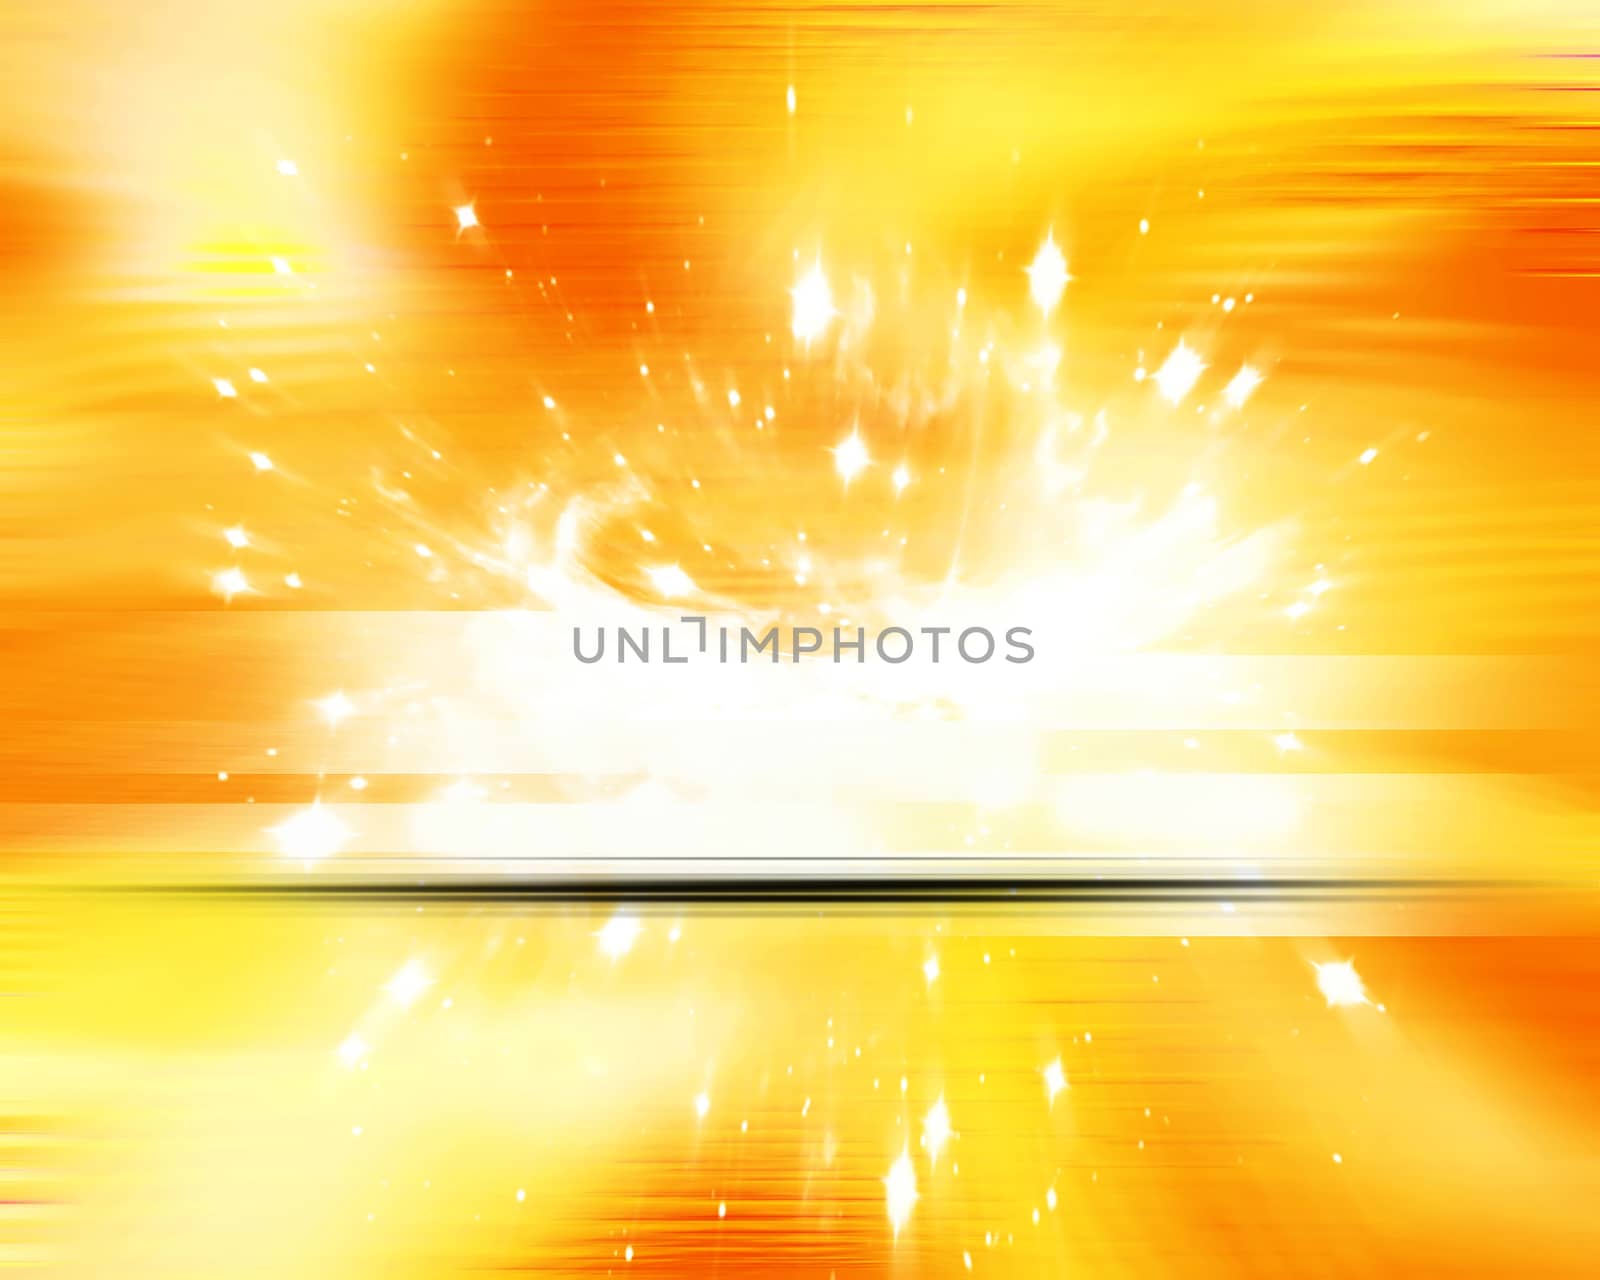 yellow abstract background with explosion of light